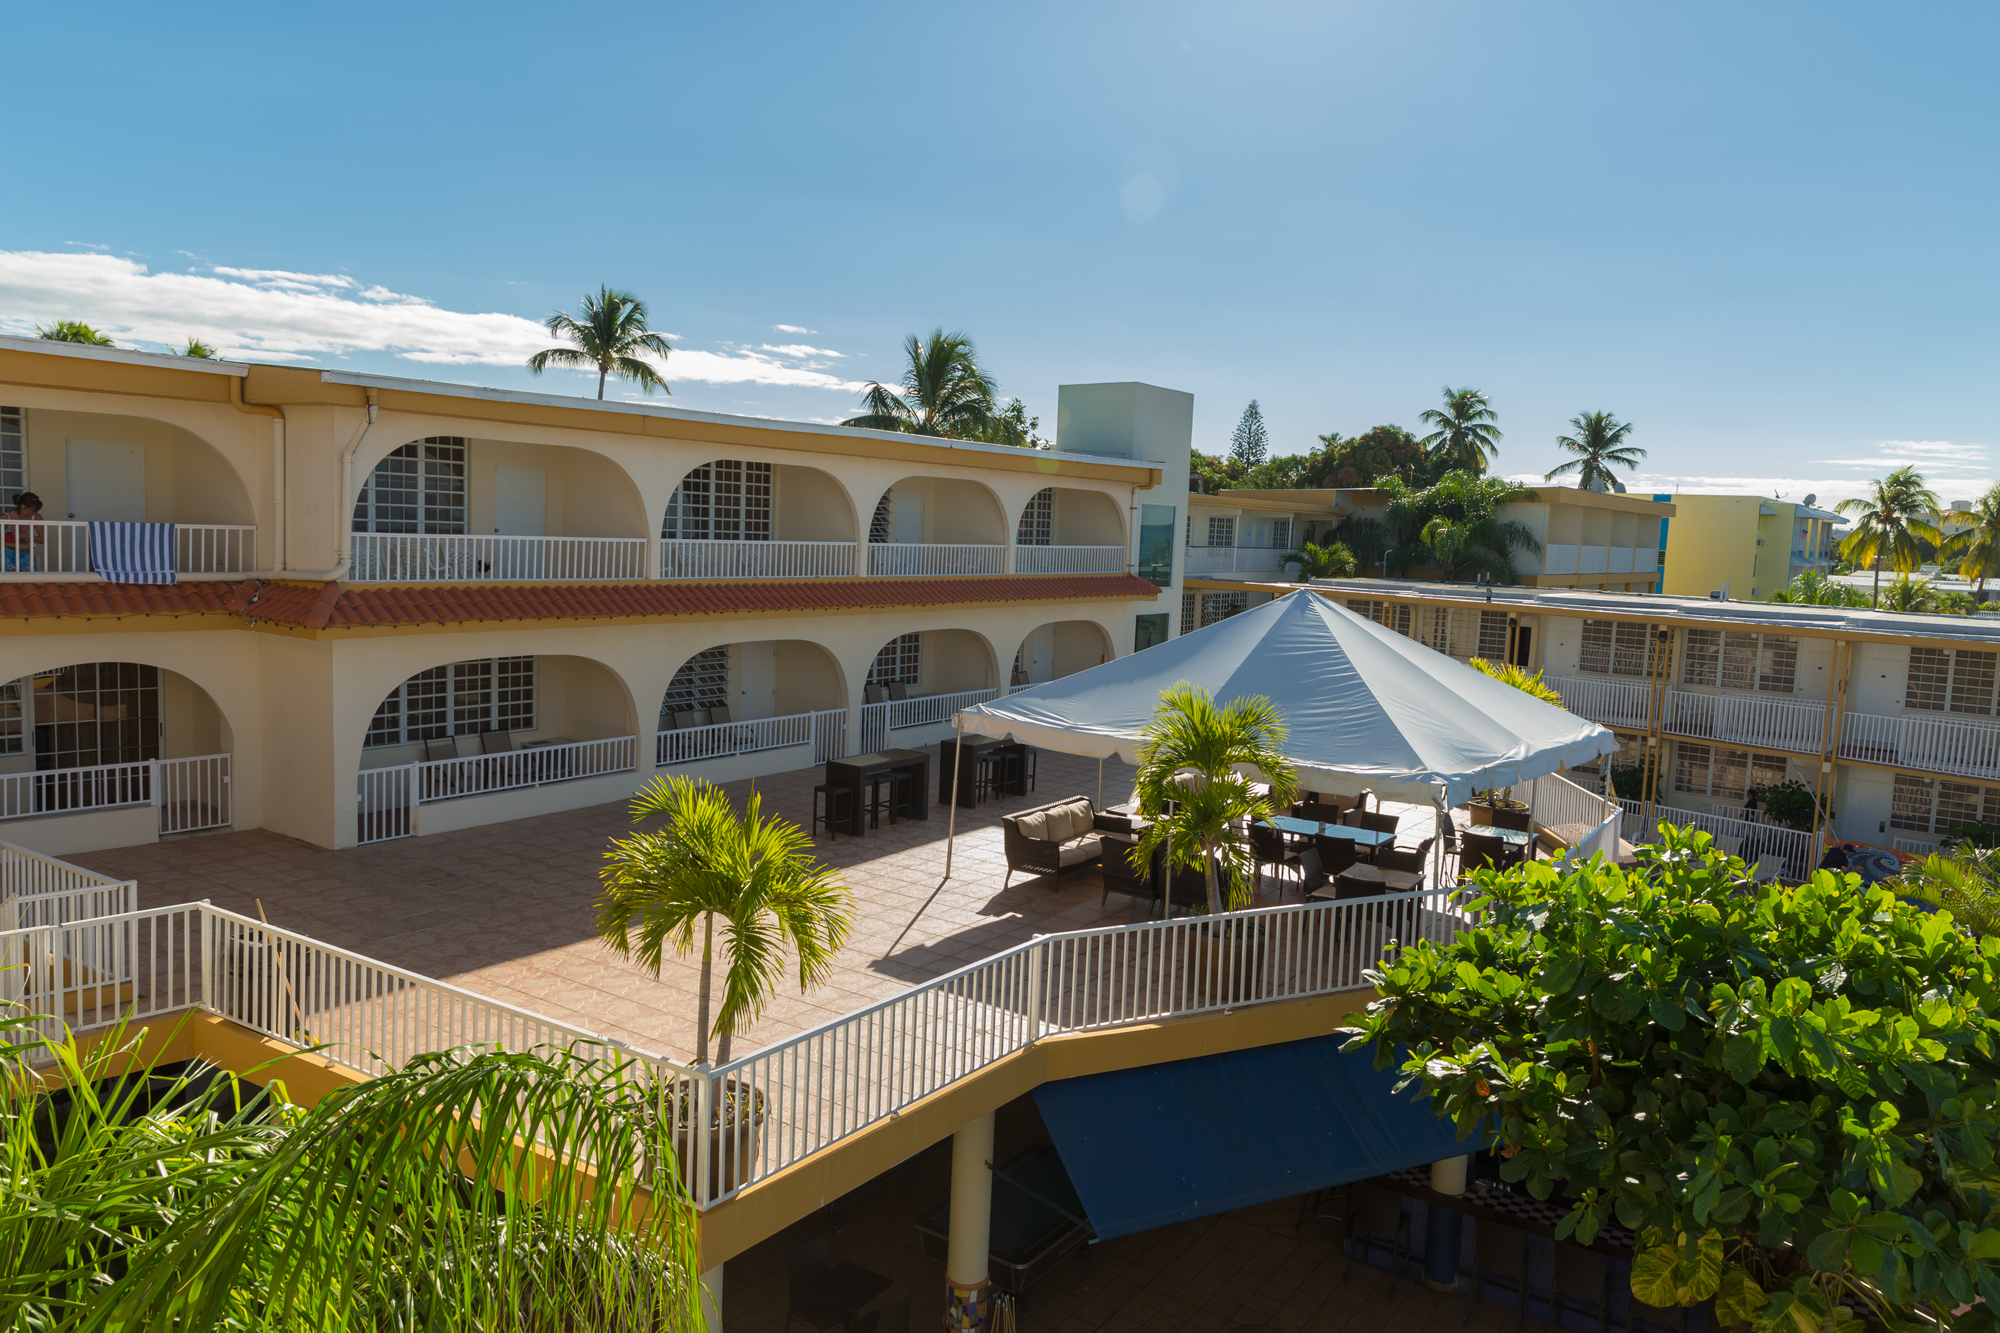 The longest running vacation experience in Rincón awaits you. A true getaway to be with the ones you love.